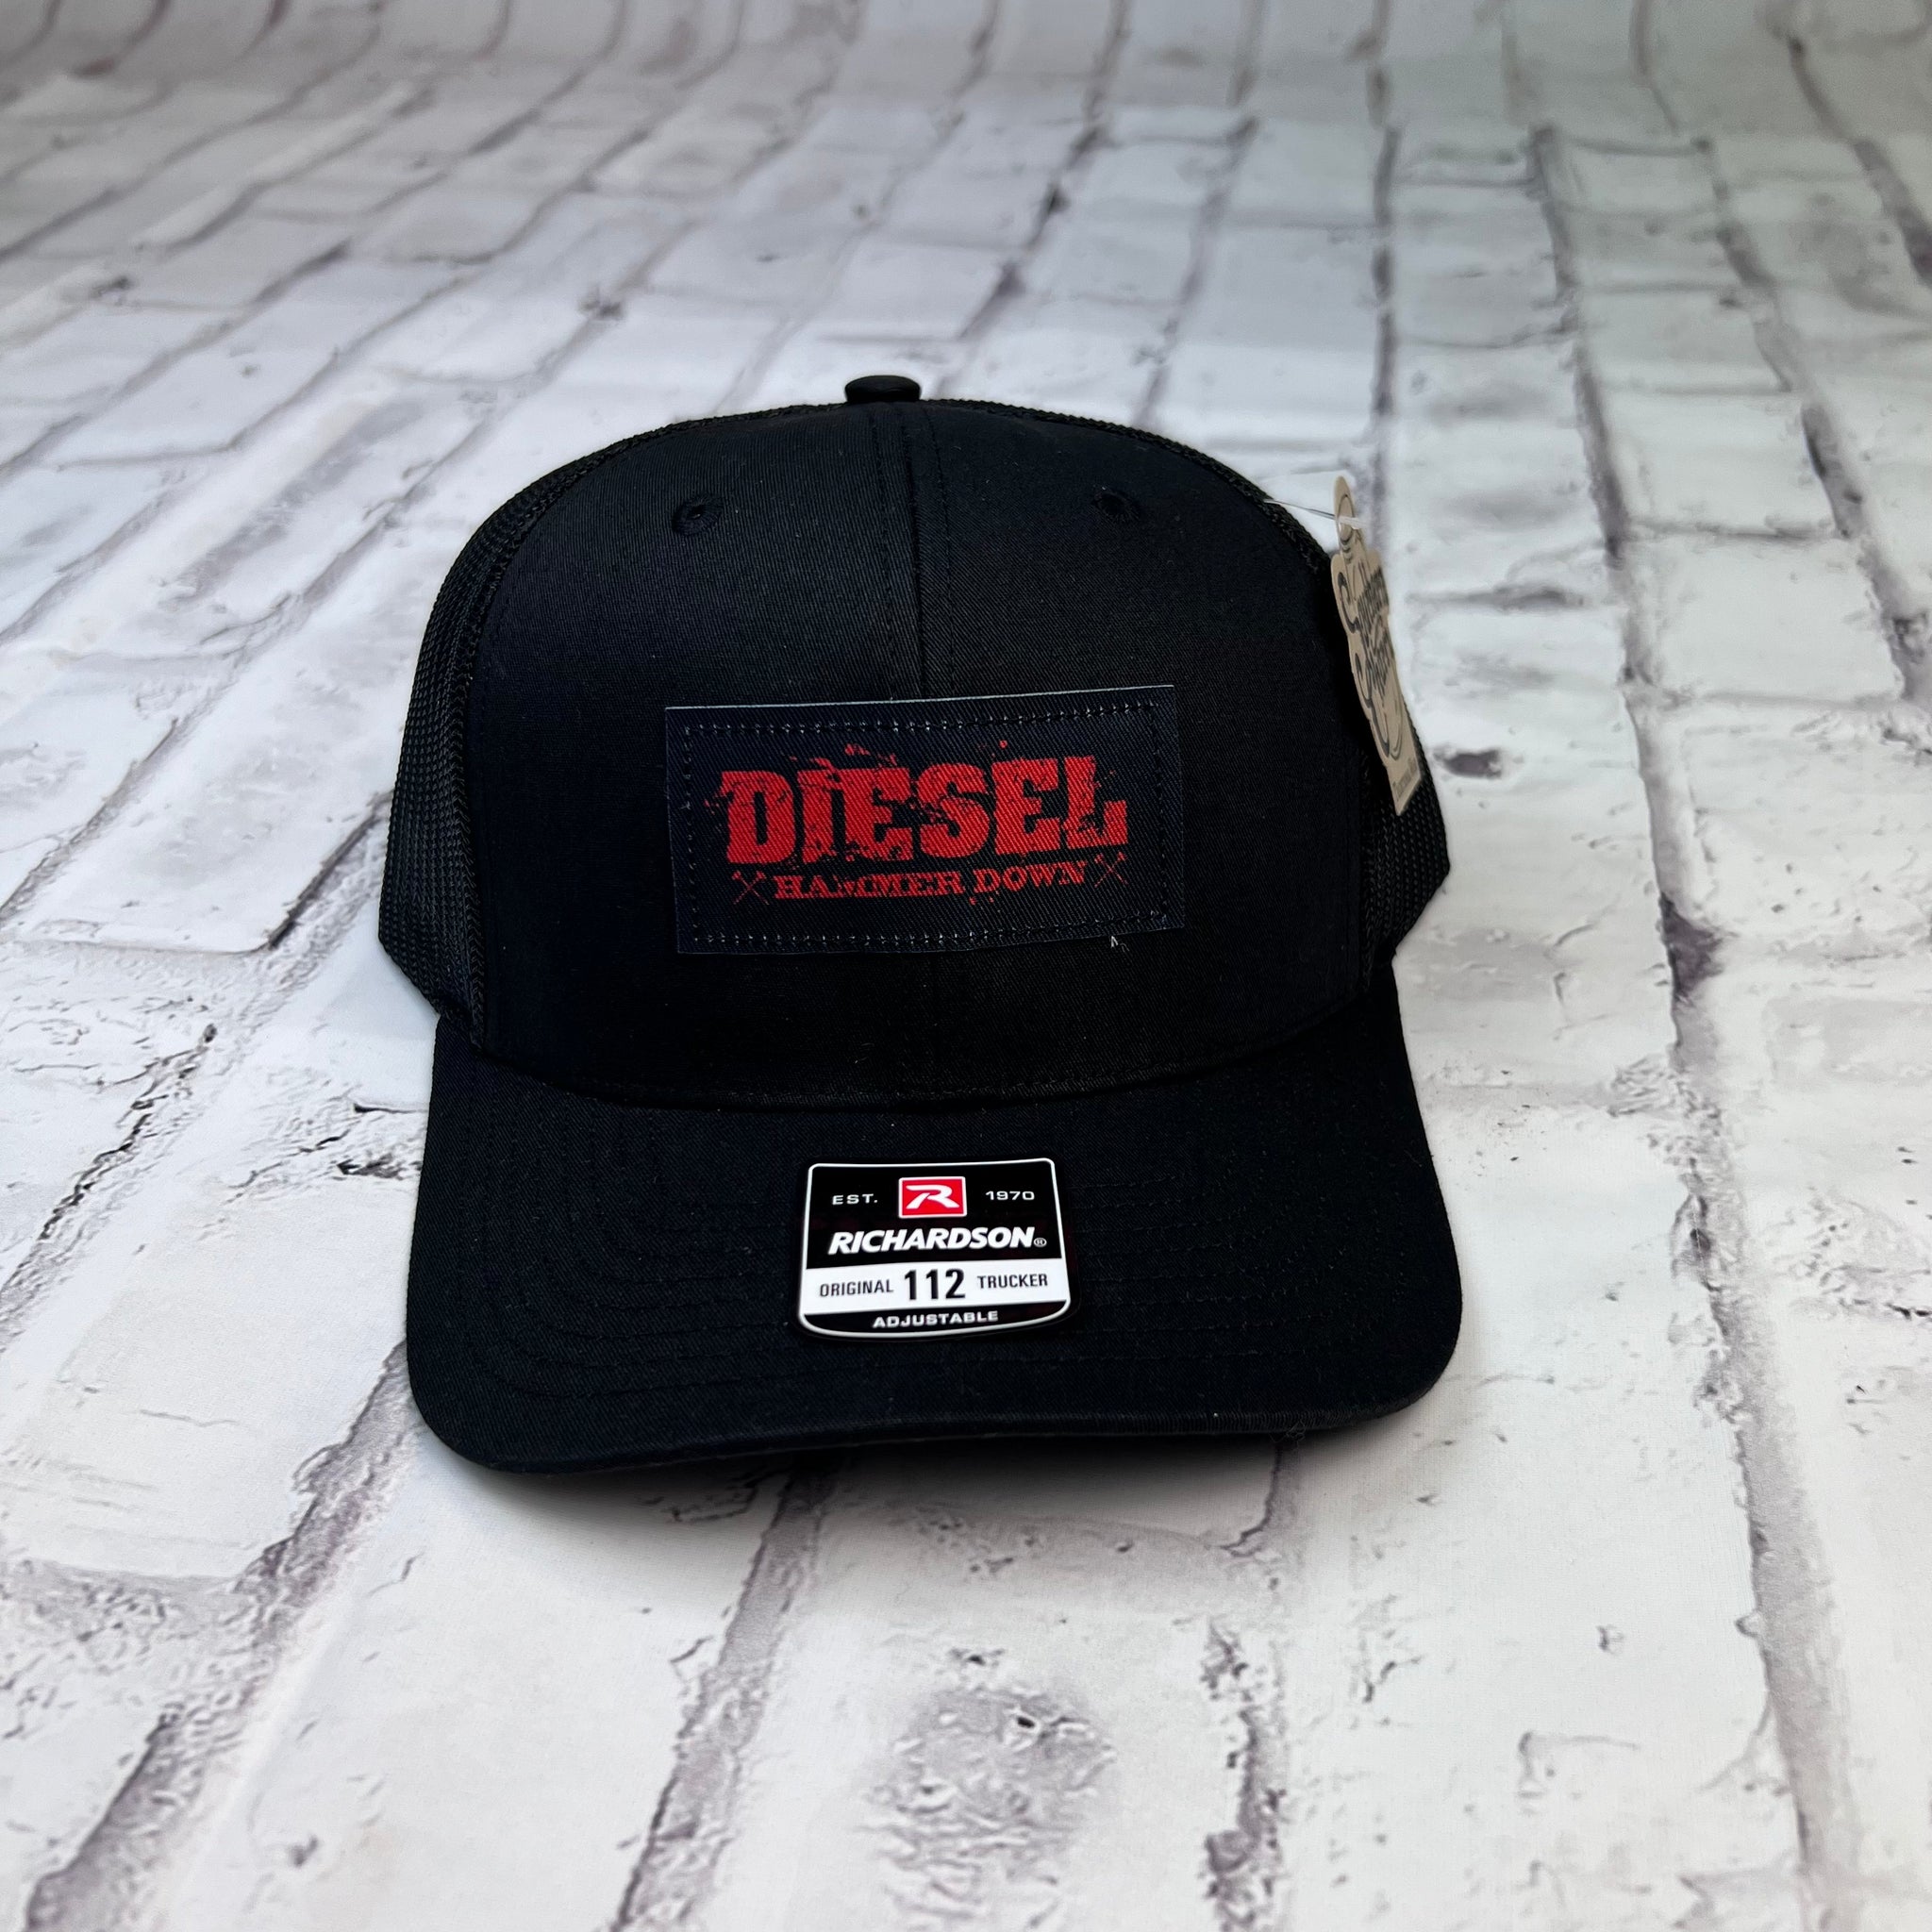 Hammer Down "Diesel" Hat - Black with Leather Patch